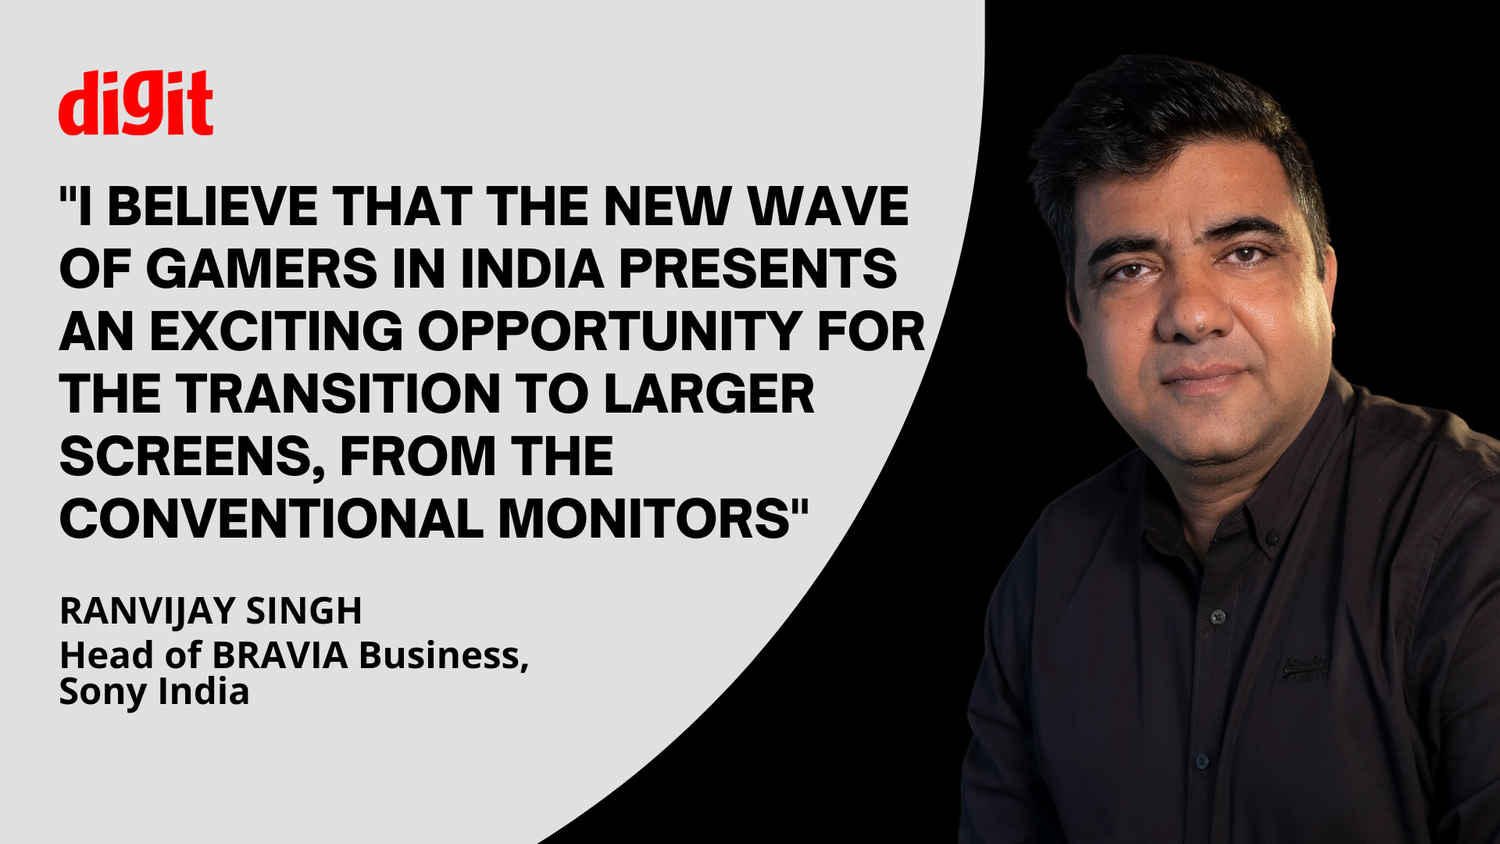 Sony set to drive gamers’ transition from monitors to TVs – In conversation with Ranvijay Singh, Head of BRAVIA Business at Sony India